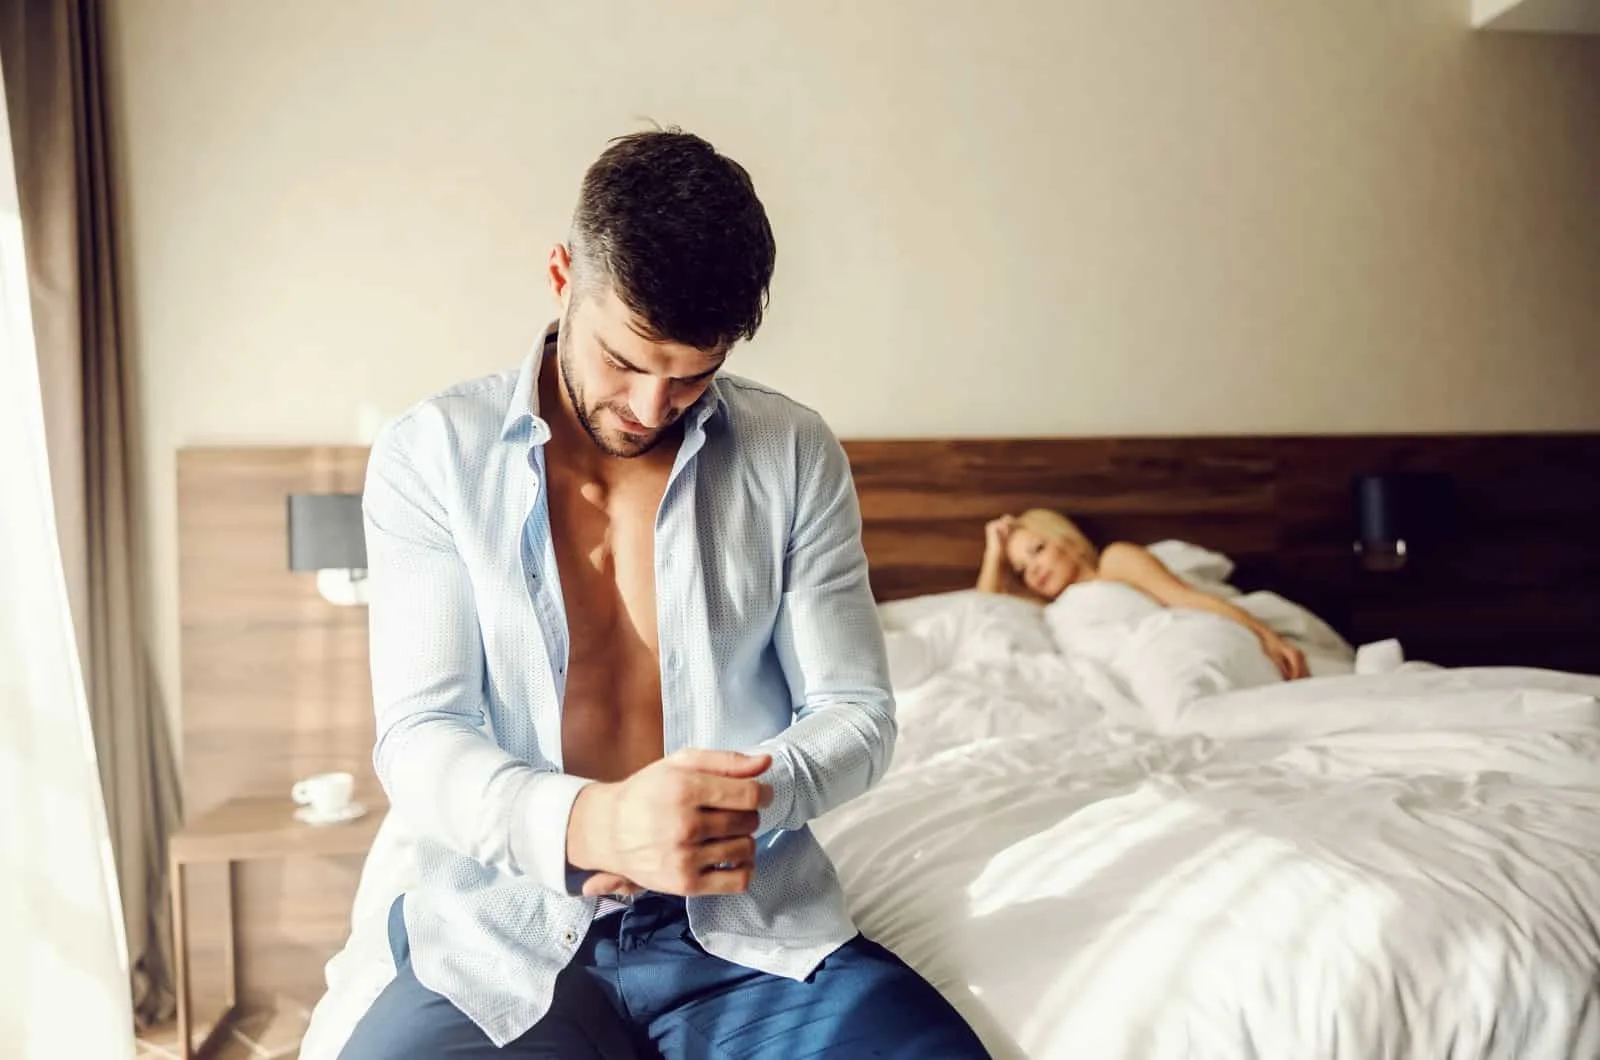 man getting ready with woman in bed in background